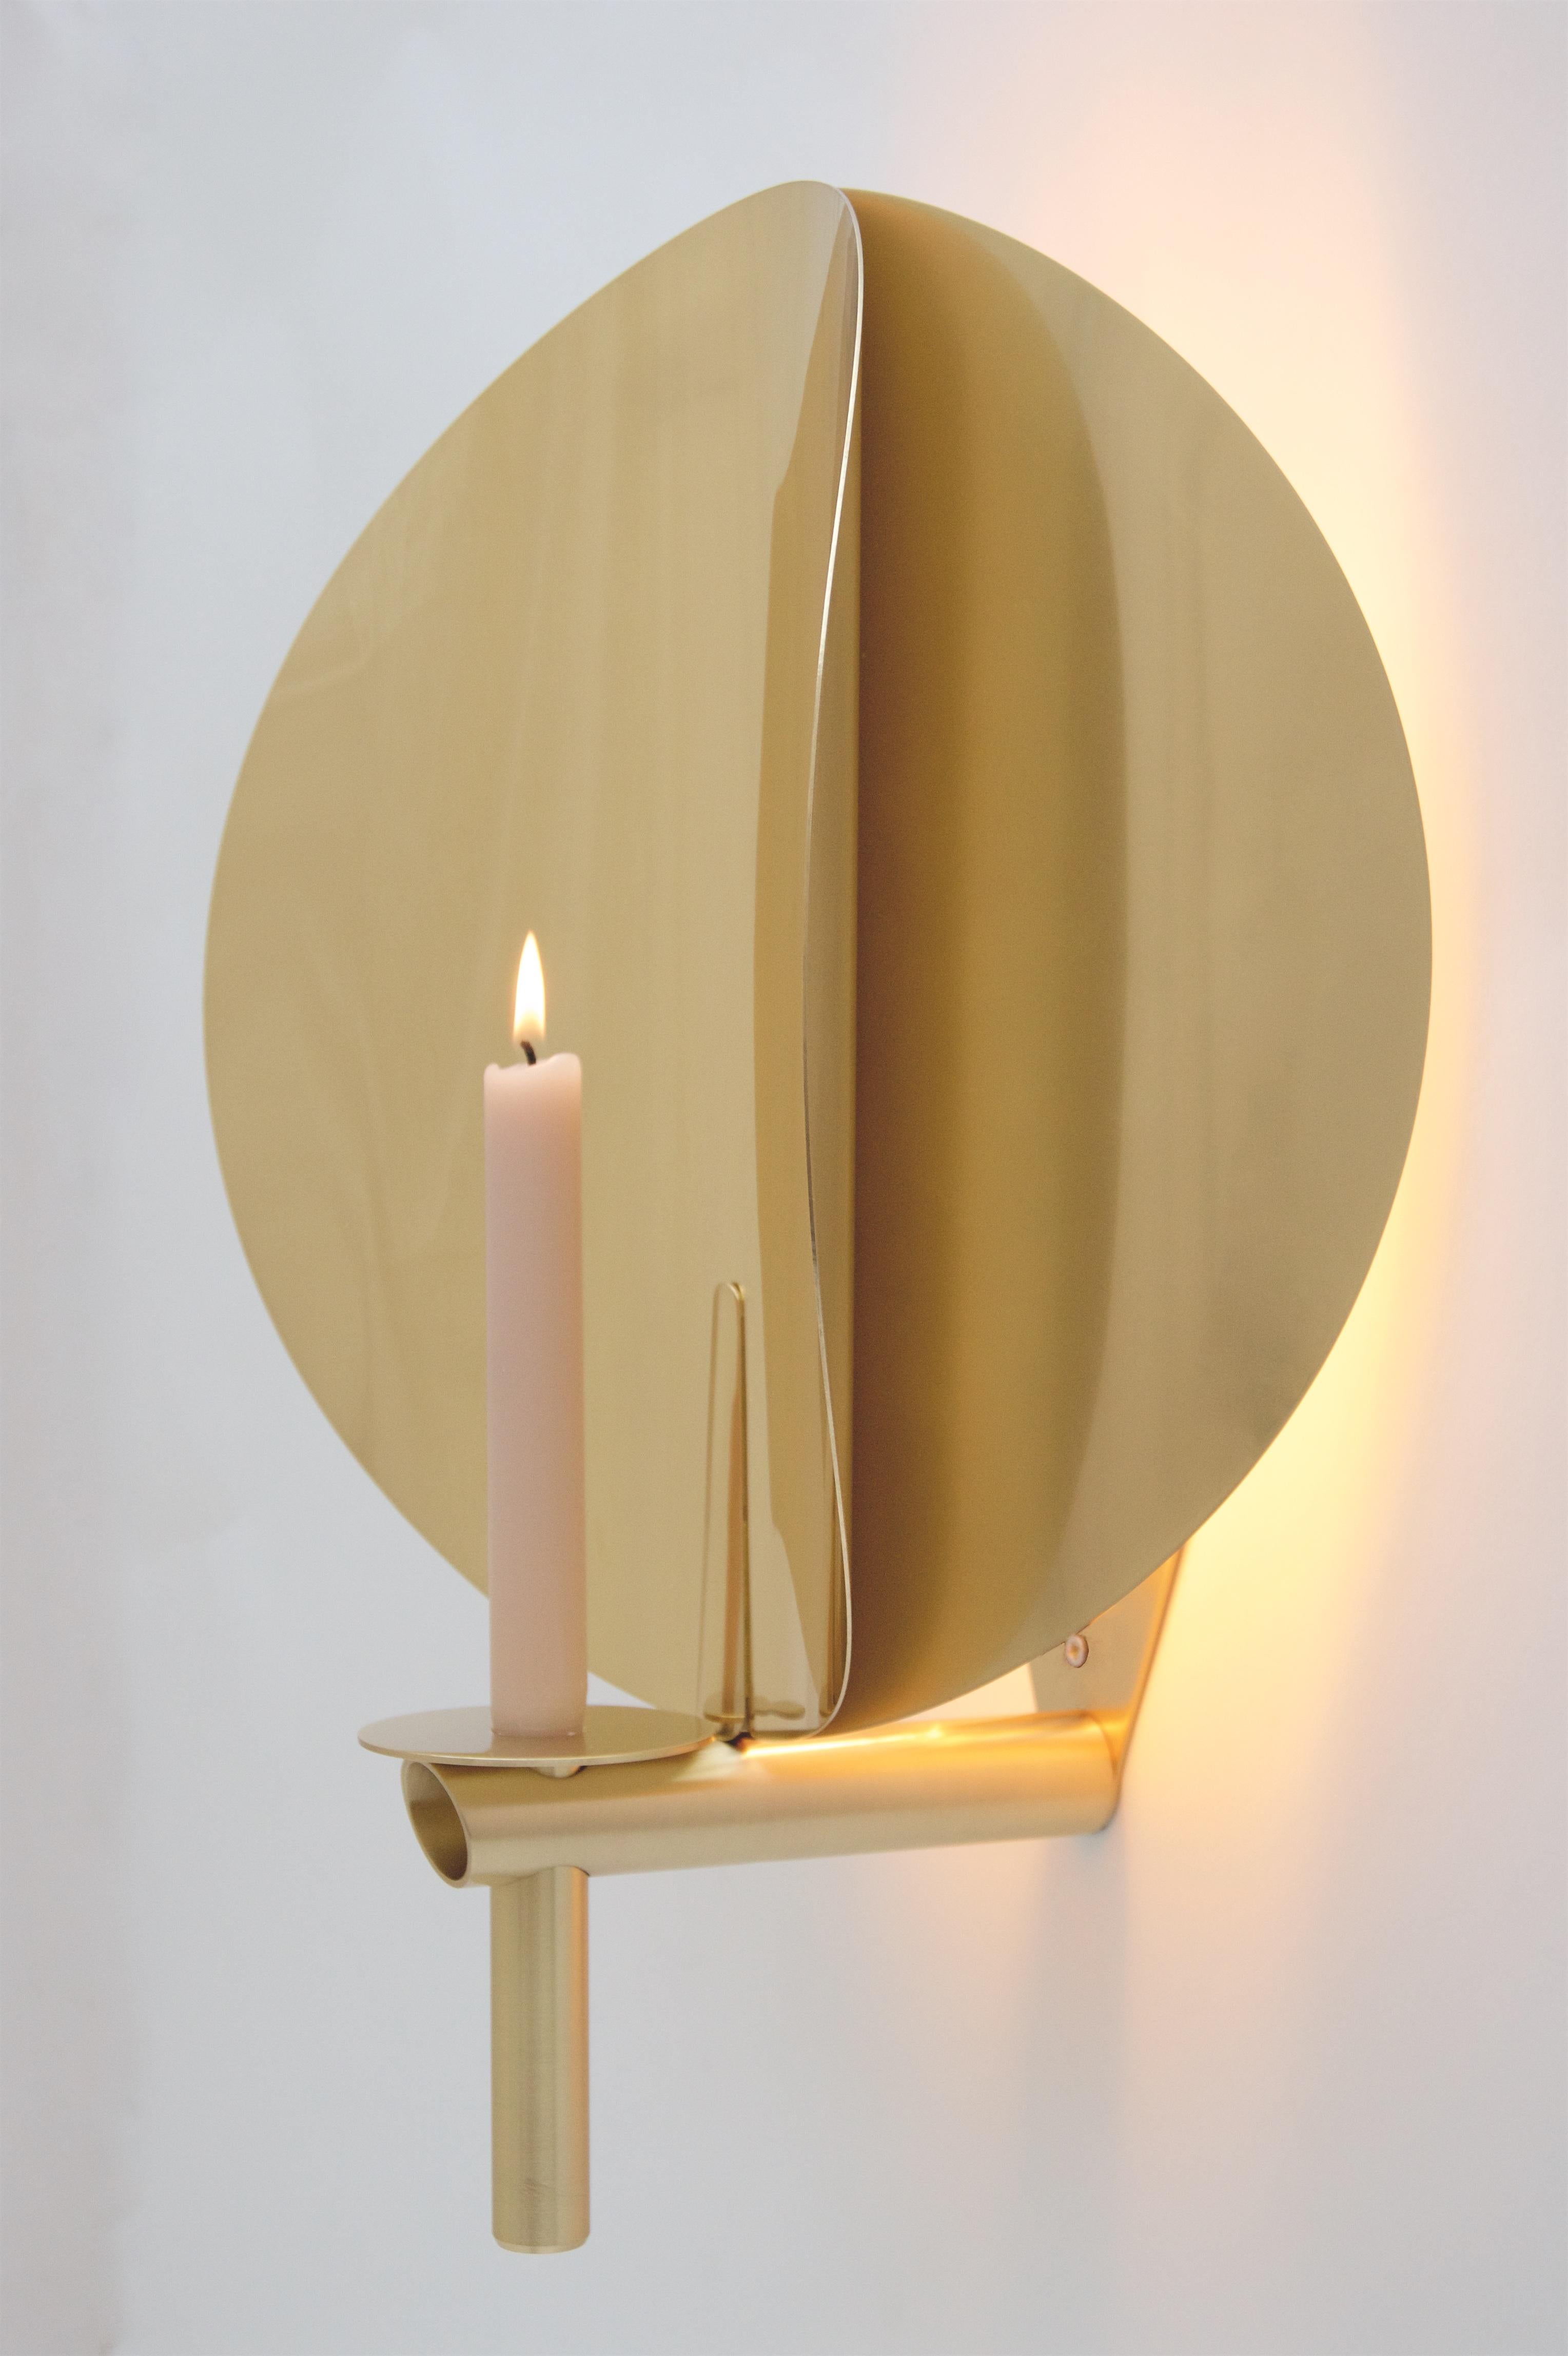 Wall sconce conceptualized by Marion Mezenge in 2022. It is made in brass, and the reflector is in polished brass.

Dimensions: 19.68? x 12.20? x 7.87?

Marion Mezenge
Cradled by the continuous work of her childhood home, Marion Mezenge